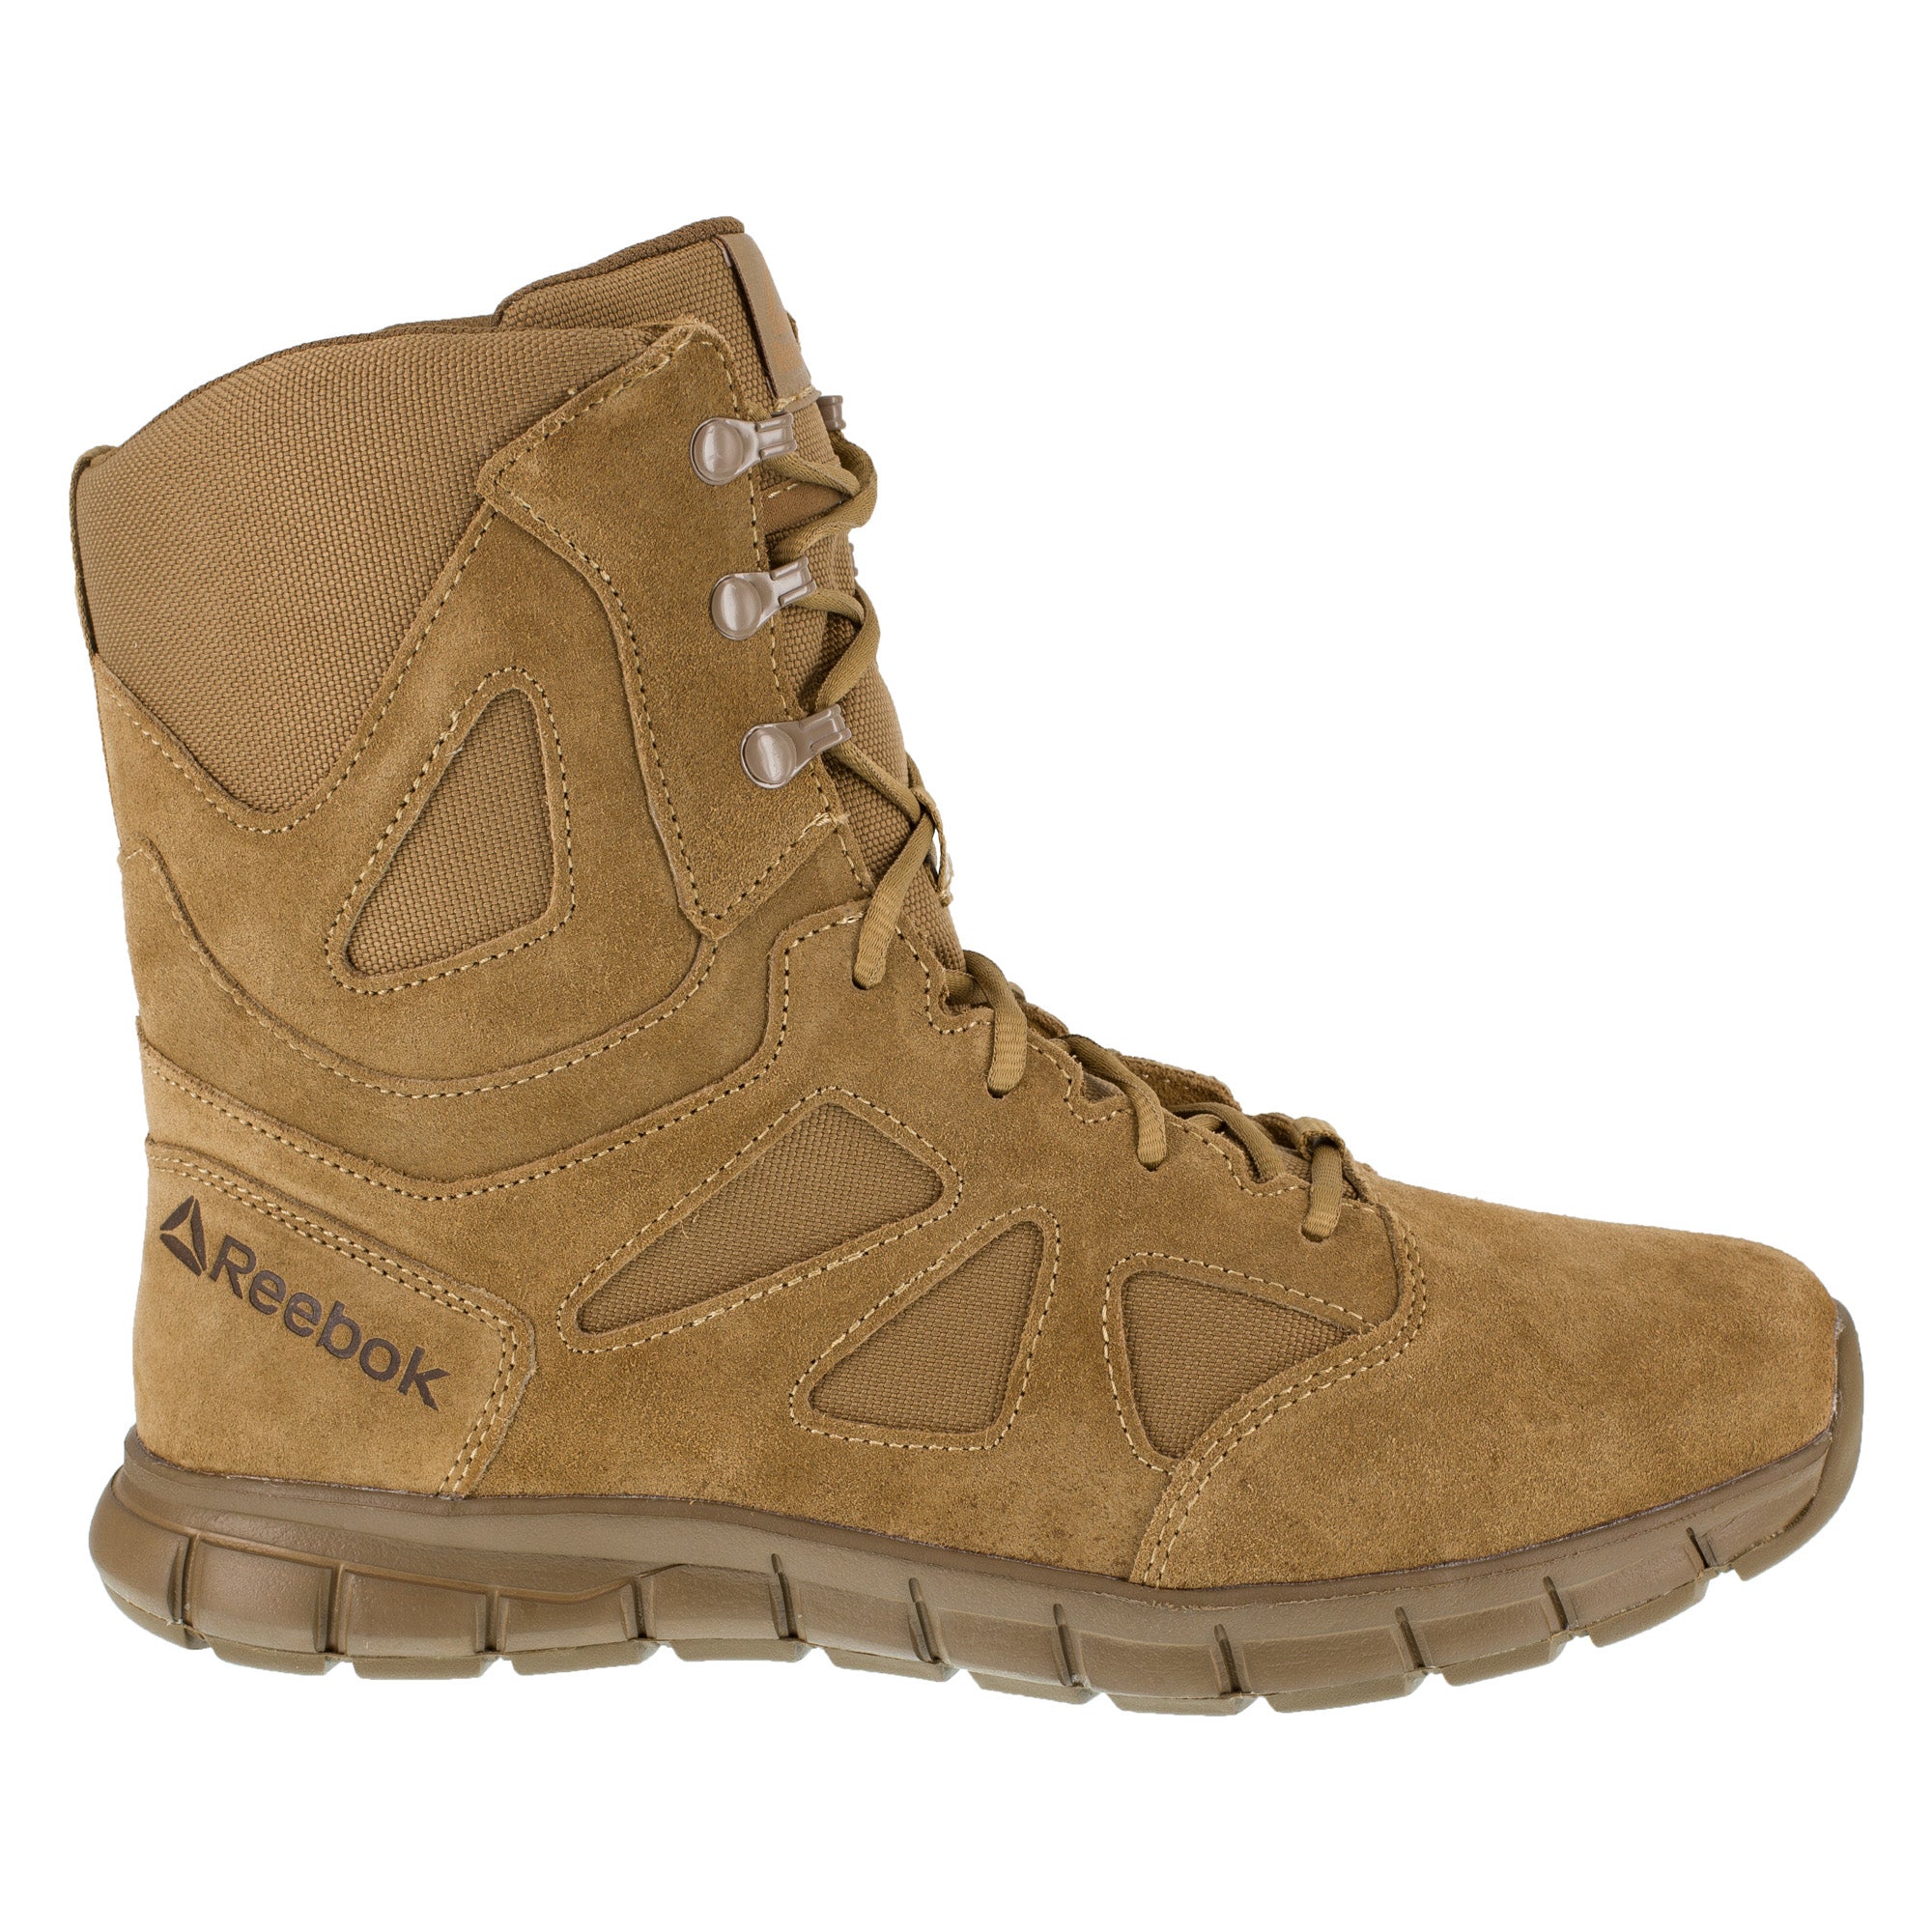 Reebok Womens Coyote Leather Military Boots 8in Tactical SR The Western Company